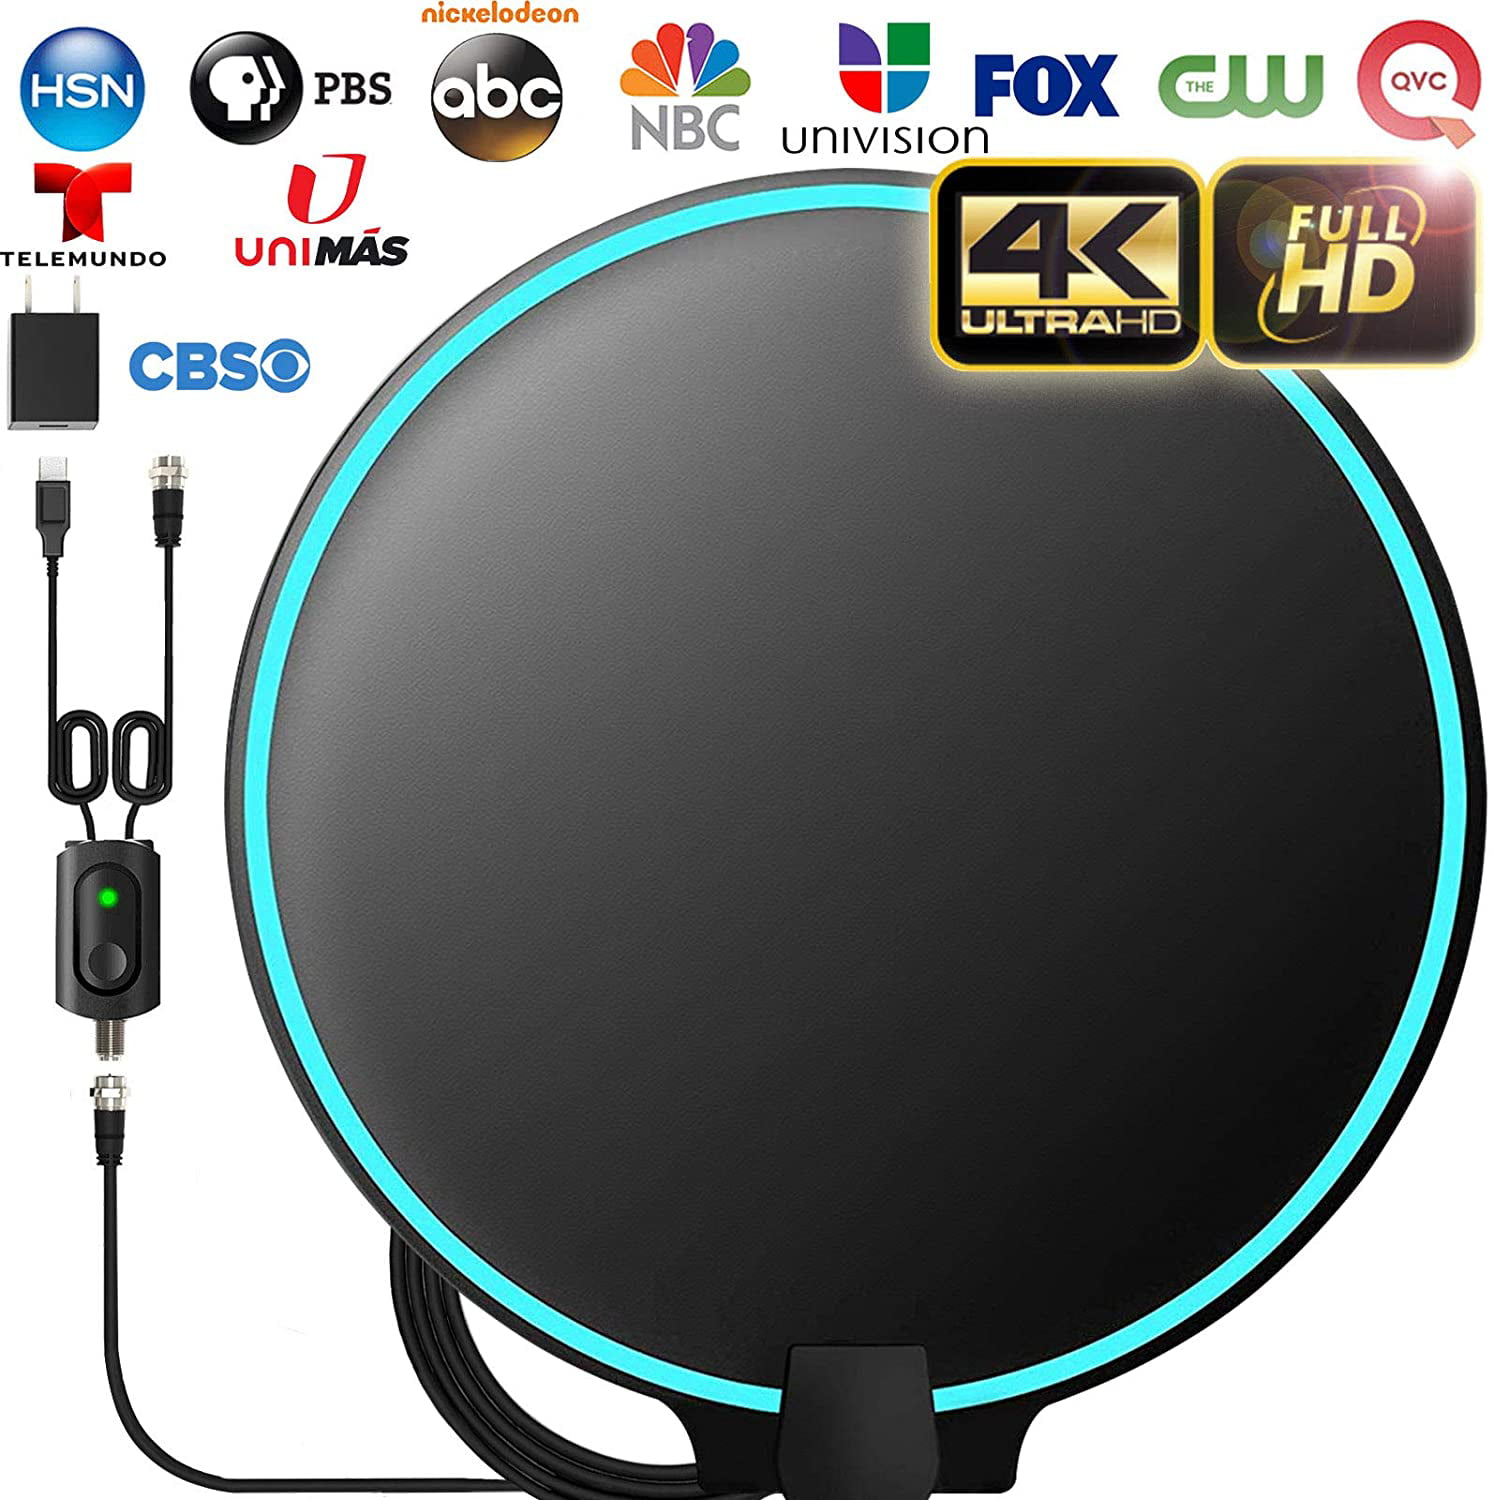 Indoor Amplified HD Digital TV Antenna 120 Miles Range Support 4K 1080p and All TVs with Detachable Amplifier HDTV Antenna 13ft Longer Coax Cable Black 